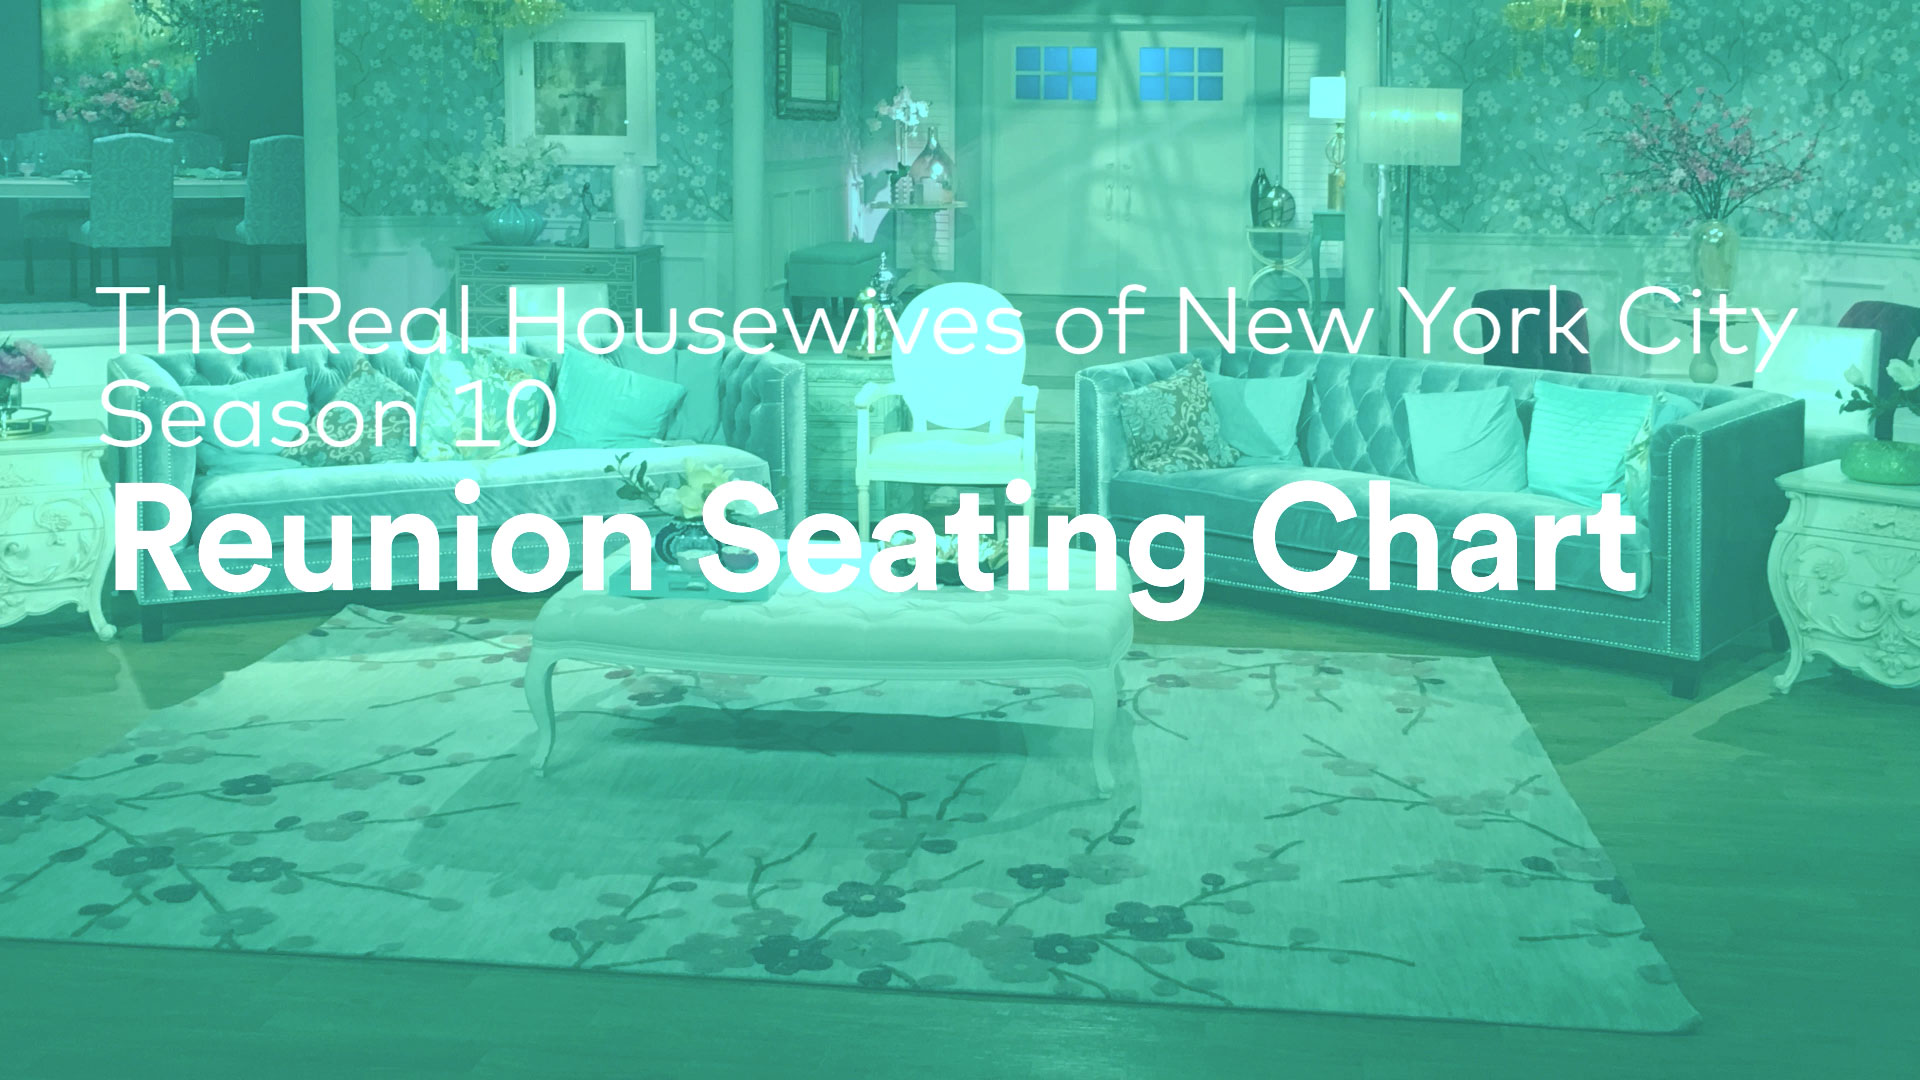 Watch Get Your First Look At The Real Housewives Of New York City